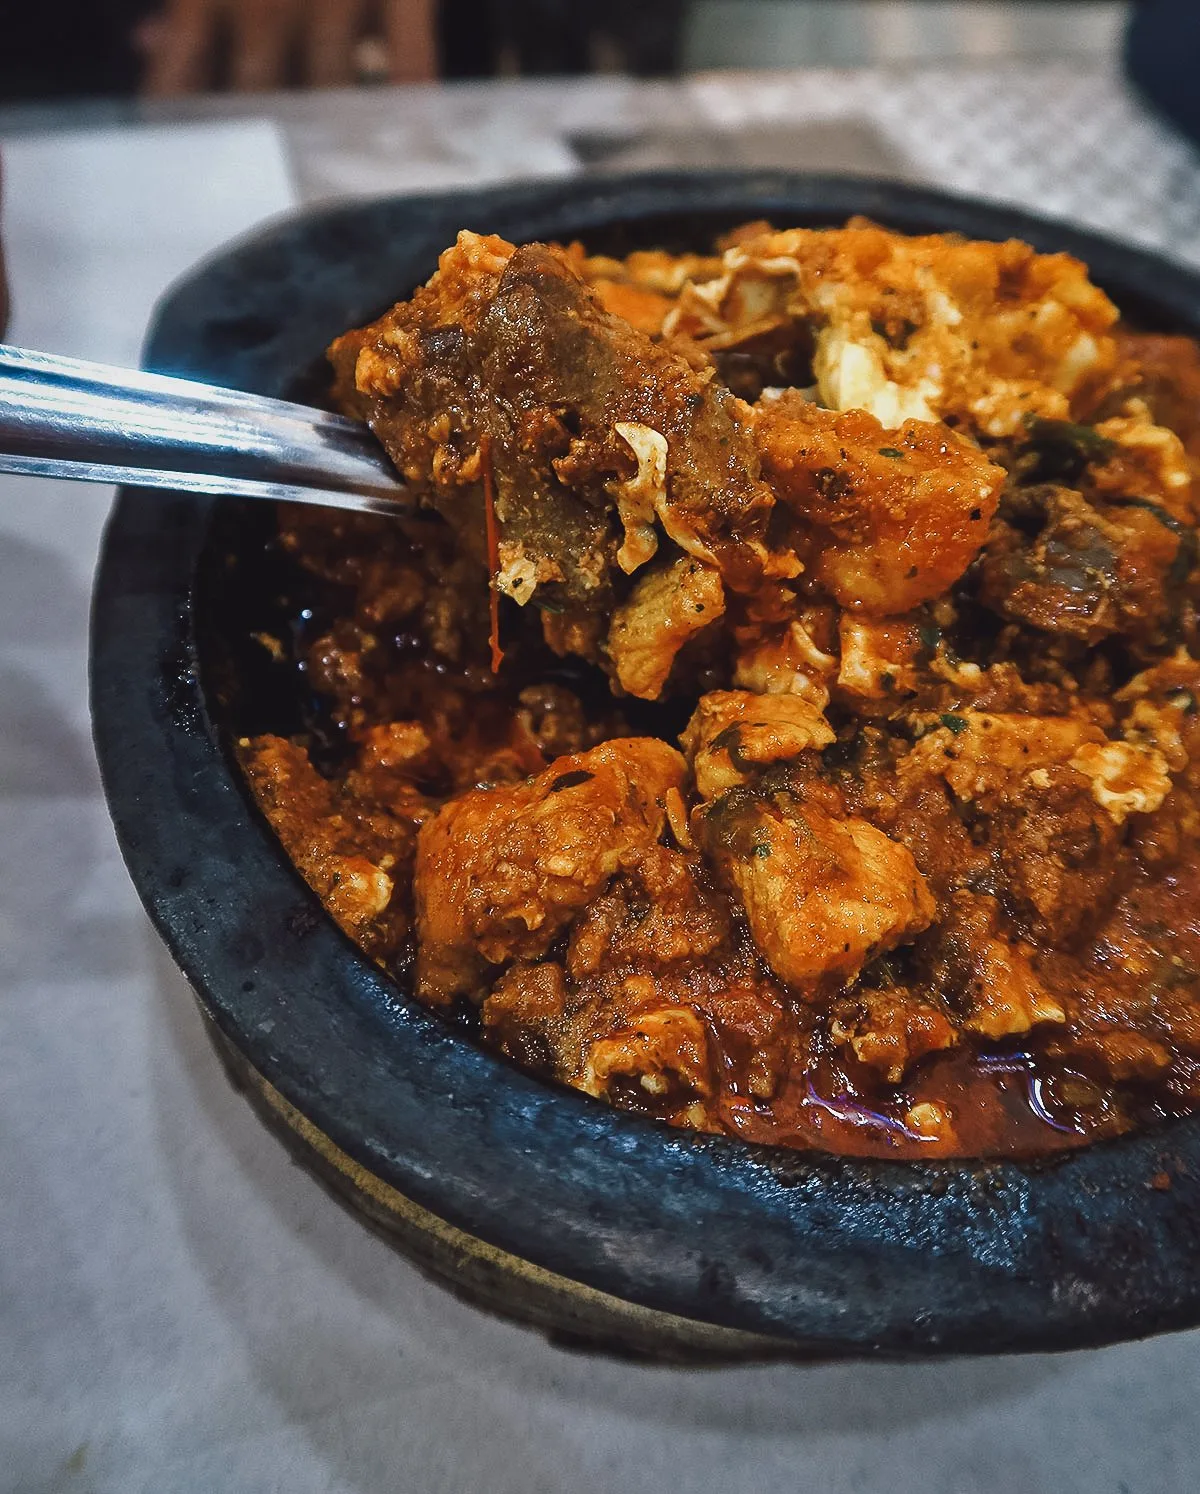 Meat tagine at a restaurant in Tangier